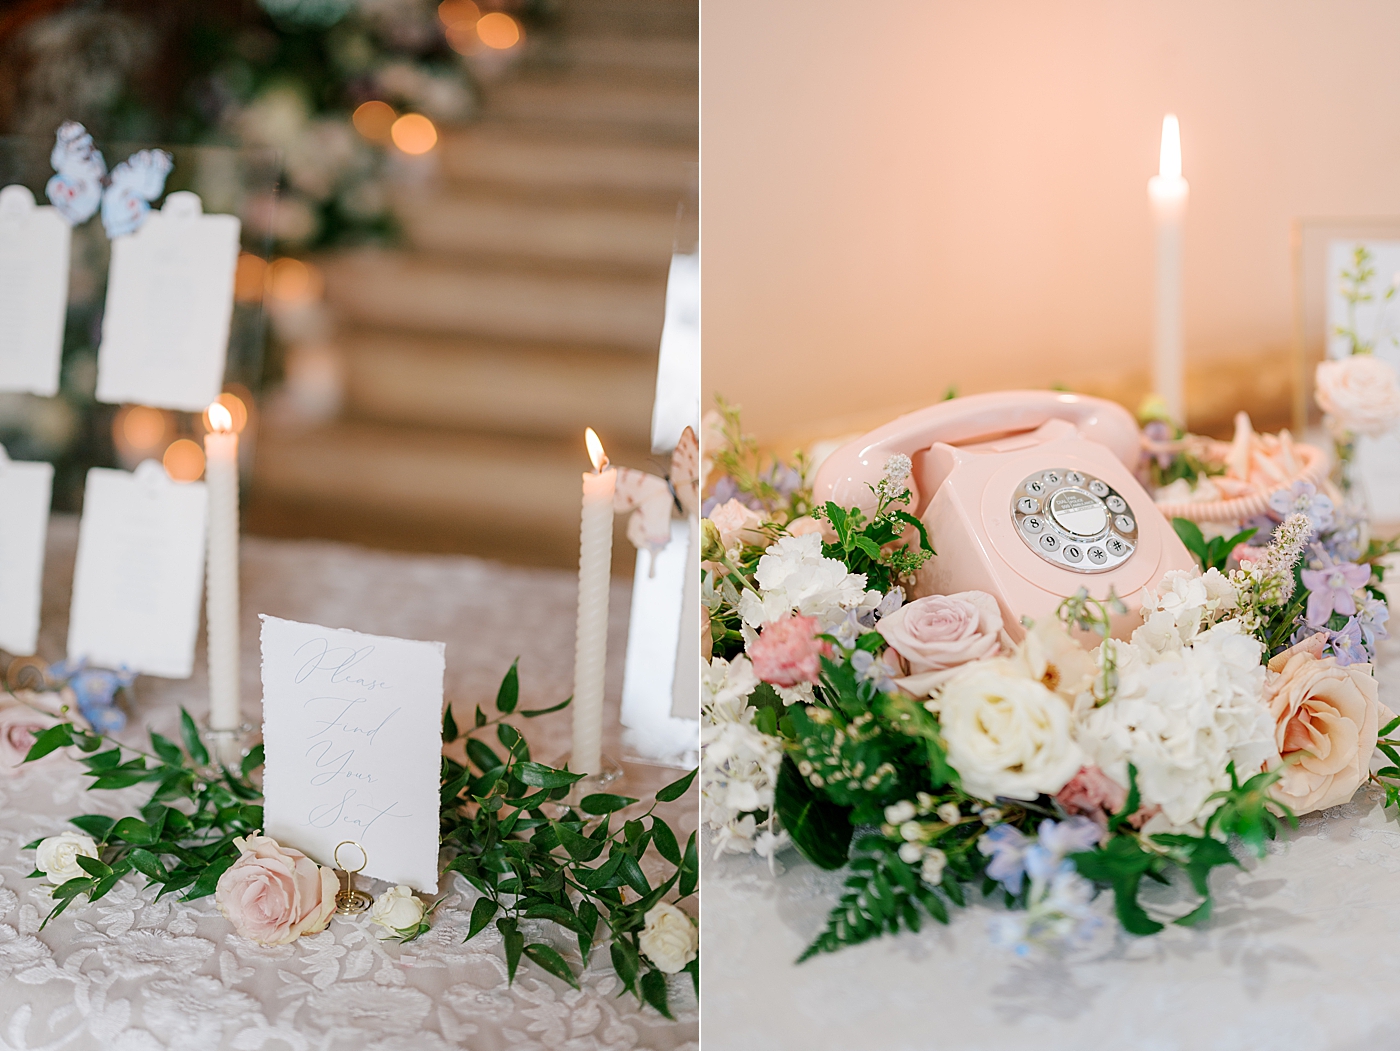 Wedding guest book voicemail phone | Image by Hope Helmuth Photography